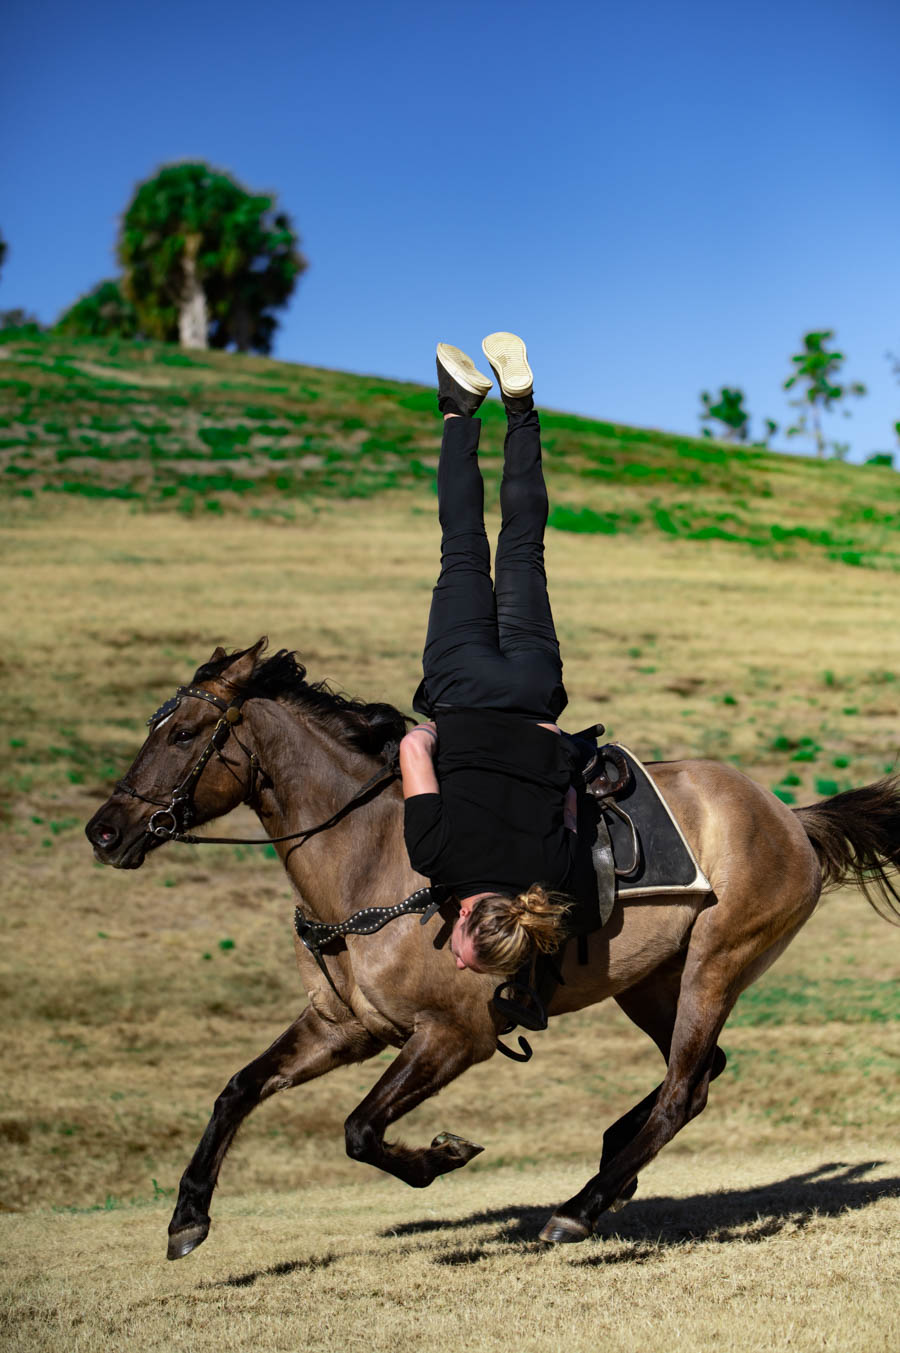 Ermes defies gravity from atop his horse, Murdock, a grulla-colored American Quarter Horse Cross